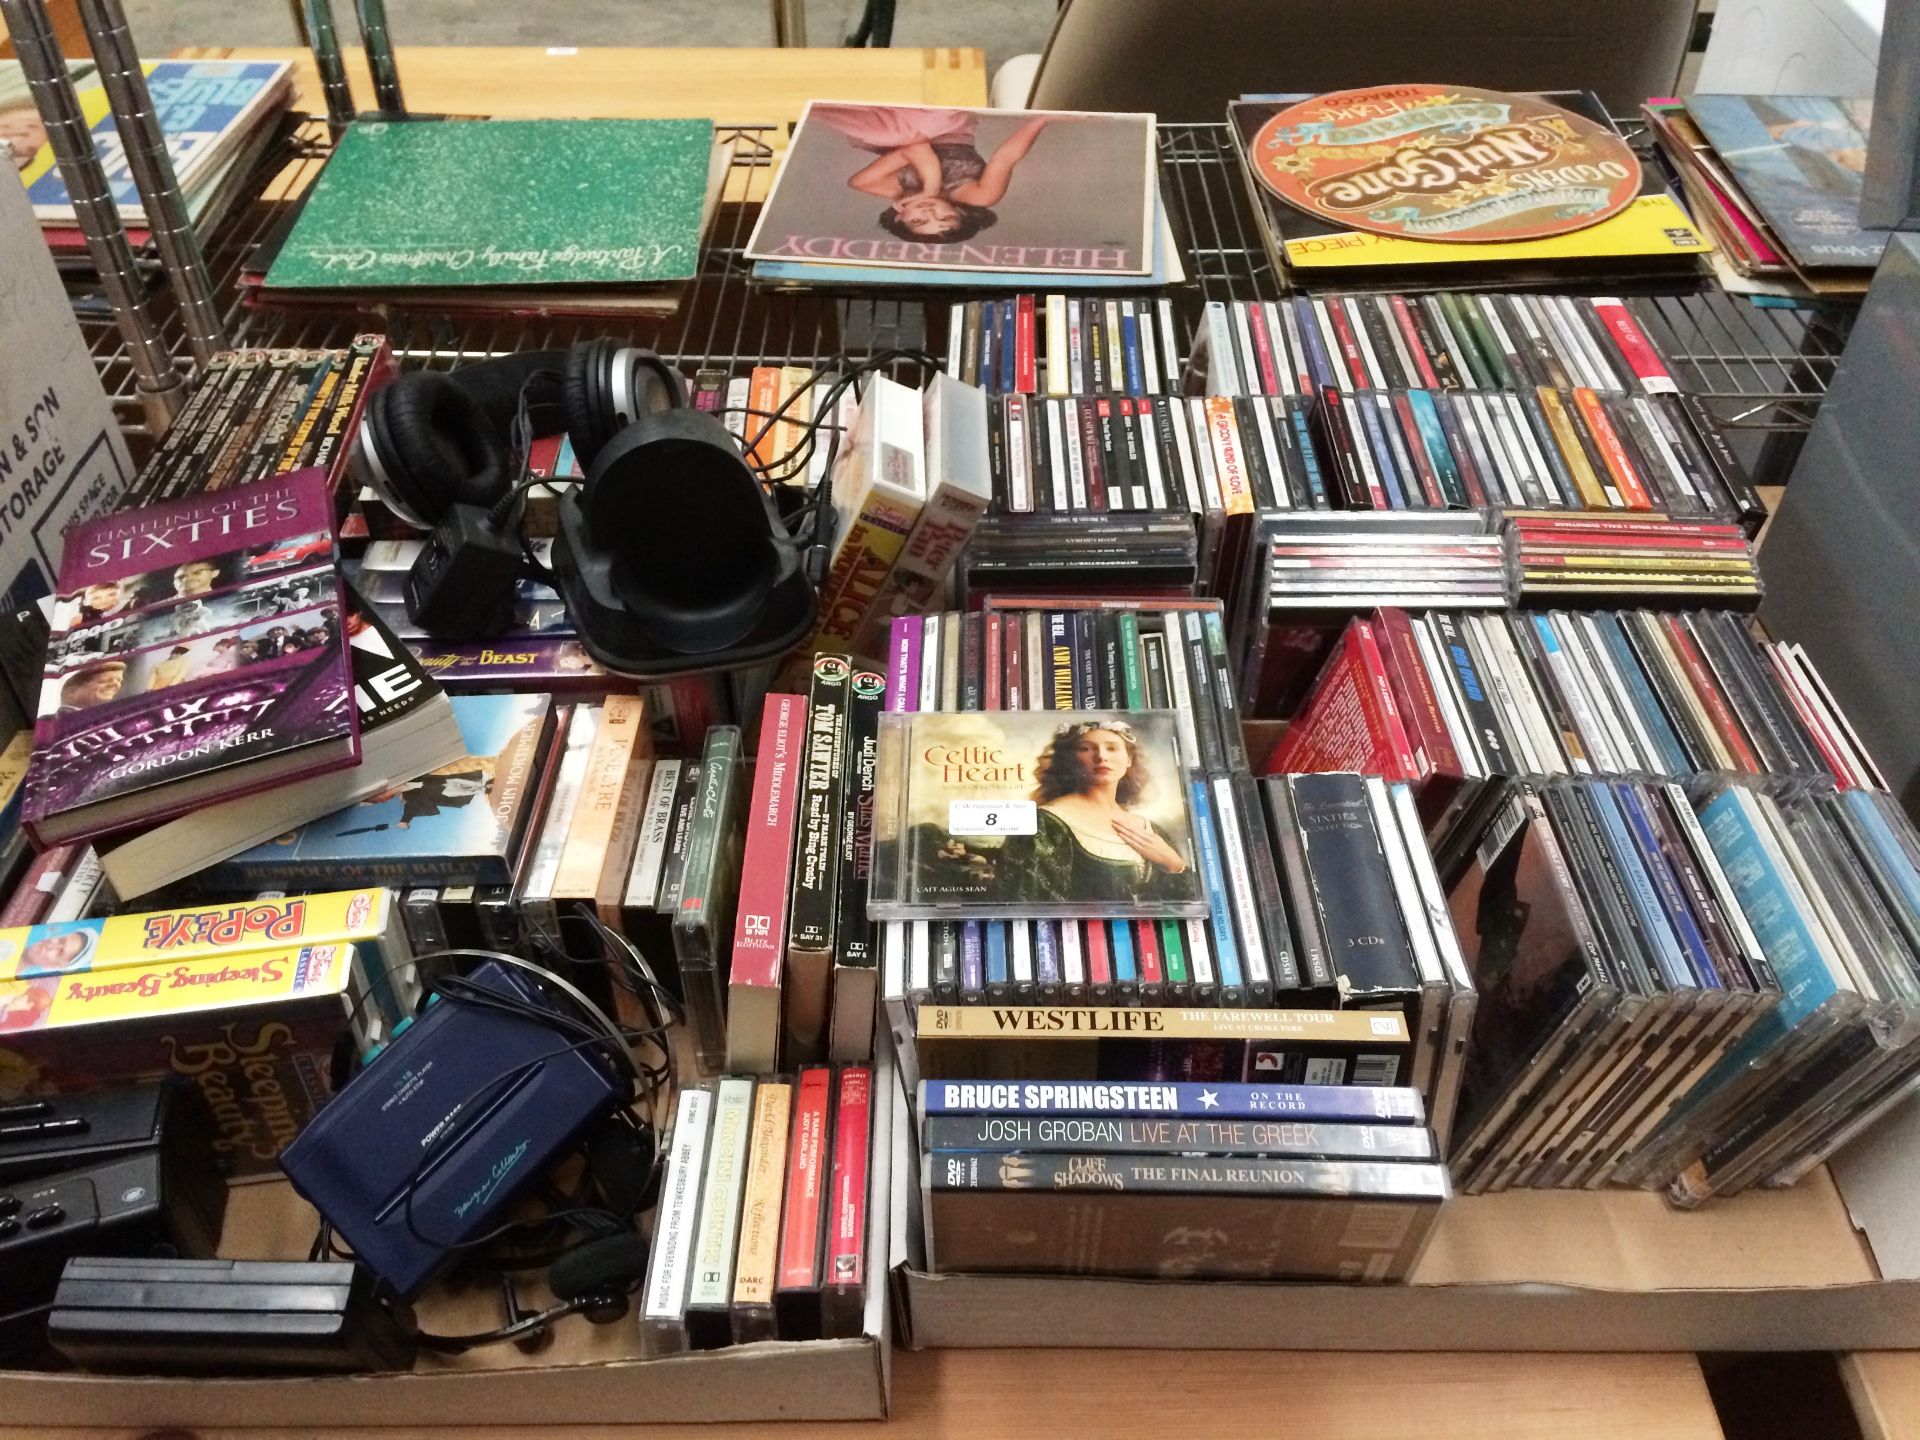 Contents to four trays a selection of Talking Book cassette tapes, VHS videos, CD's and a few DVD's,